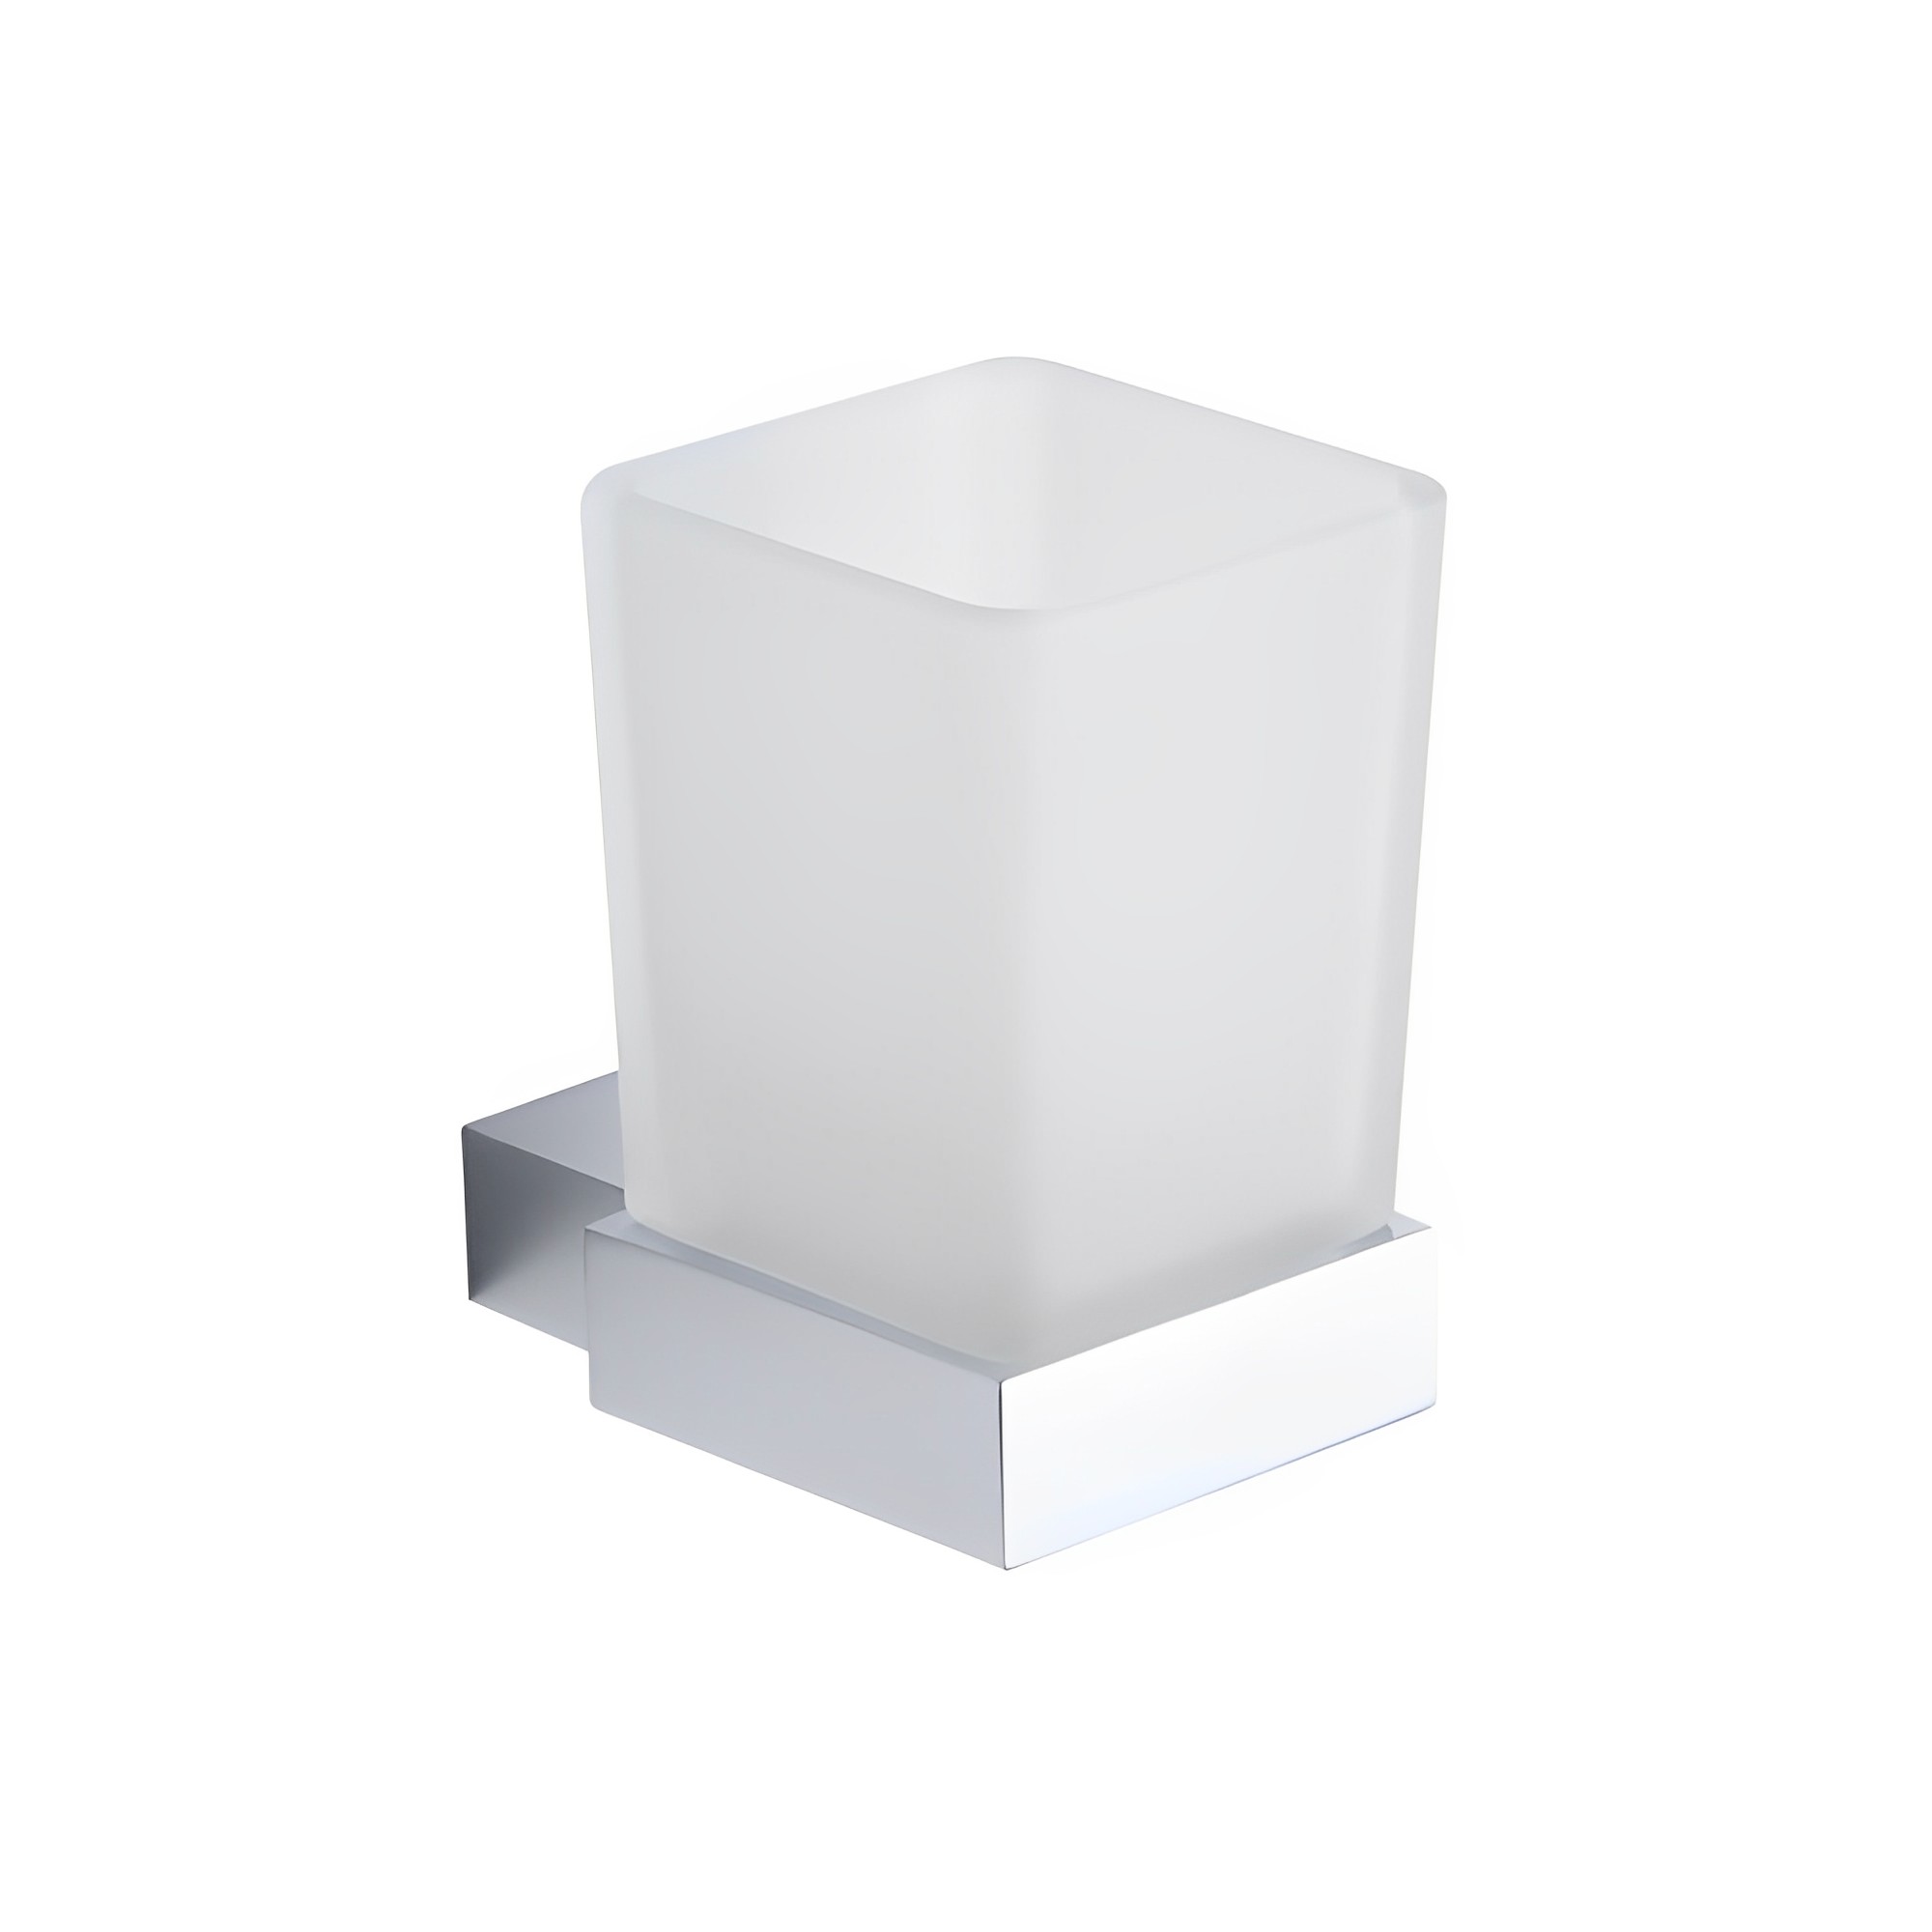 OJ-G1412L Wall-Mounted Square Cup Holder with Frosted Glass Cup Set for Bathroom Brass Bathroom Accessories